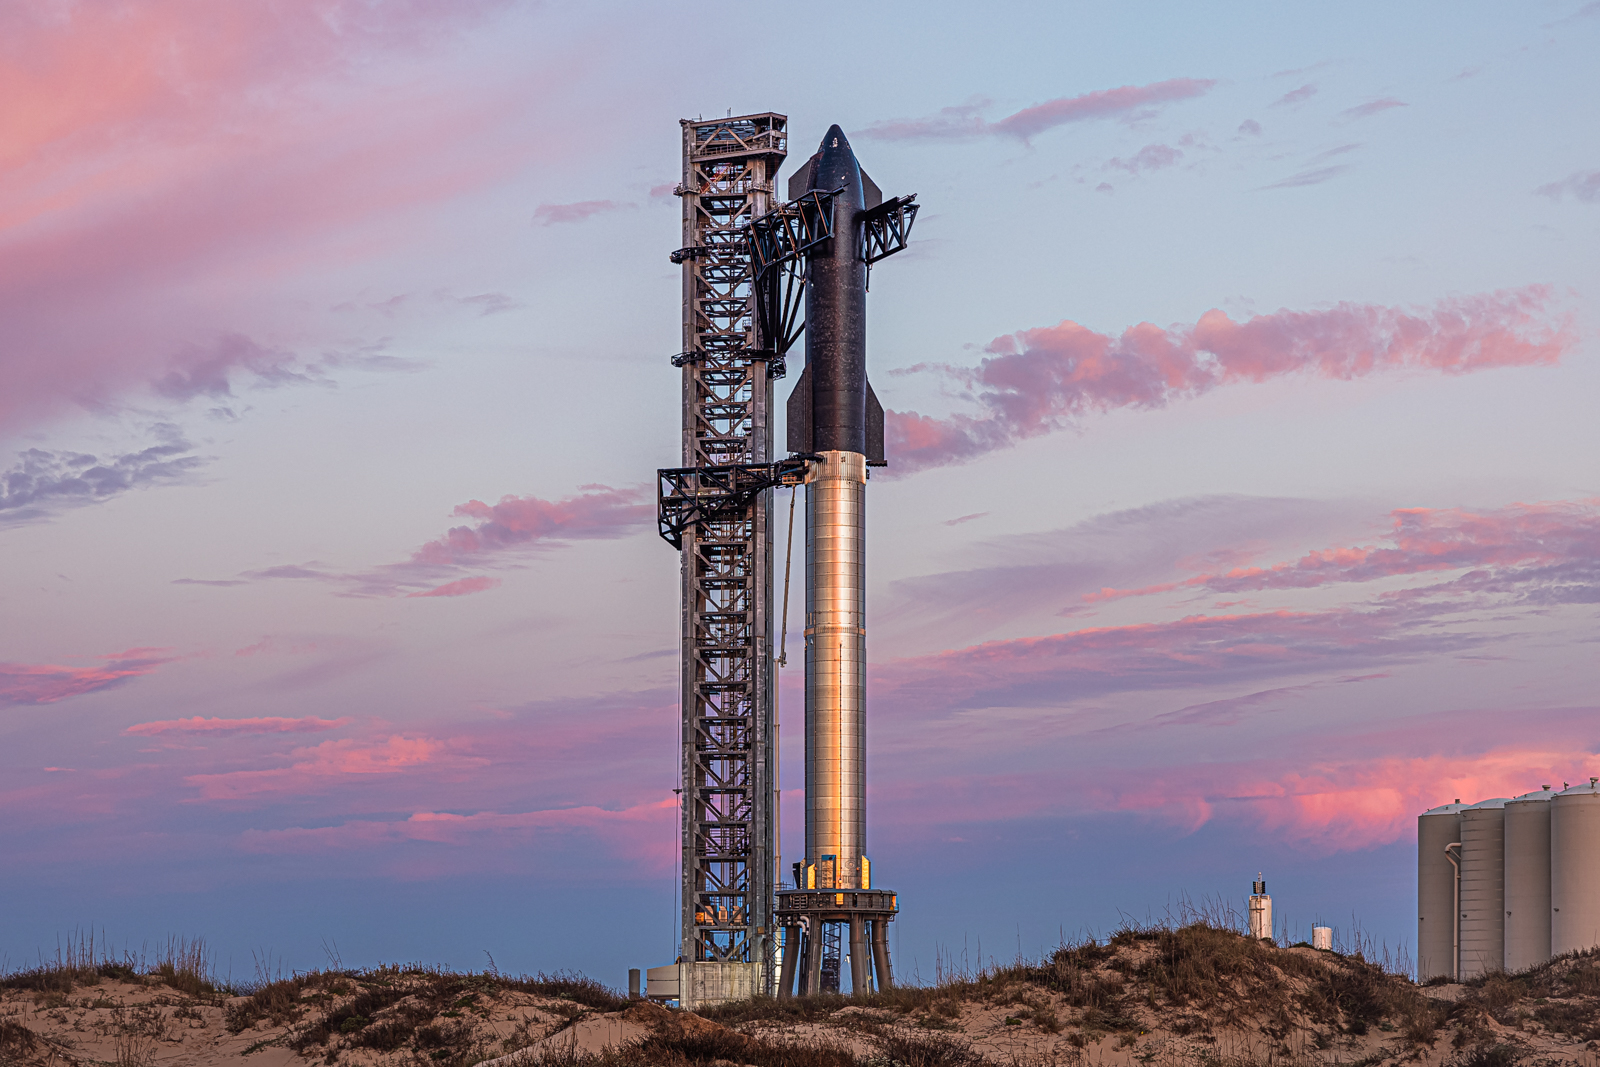 SpaceX moves a massive rocket with 33 engines to its launch pad for